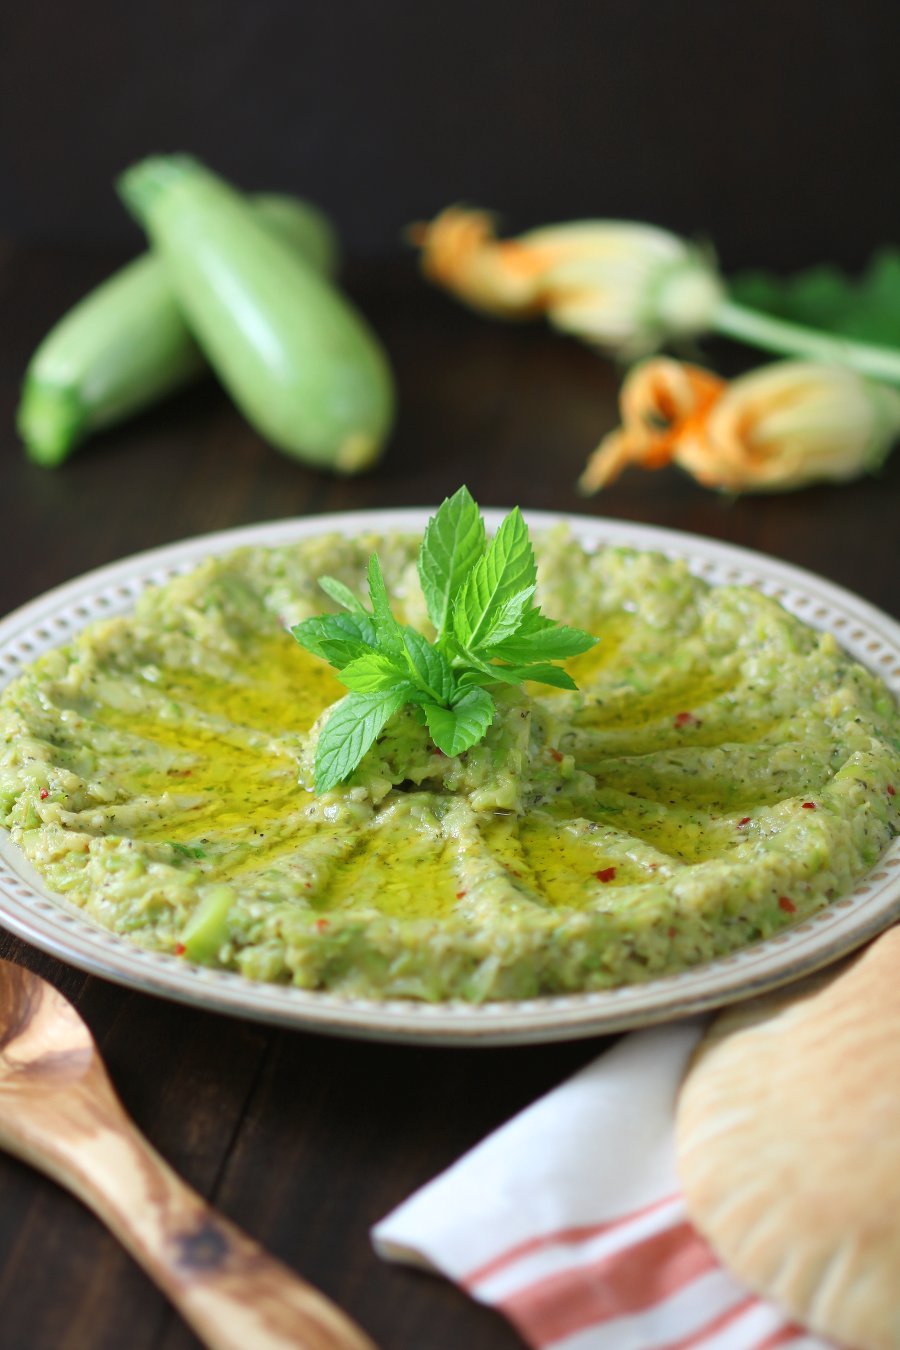 Quick and easy recipe for Zucchini and Mint Spread that needs only five ingredients. Great, delicious way to use up those summer zucchinis and squashes!